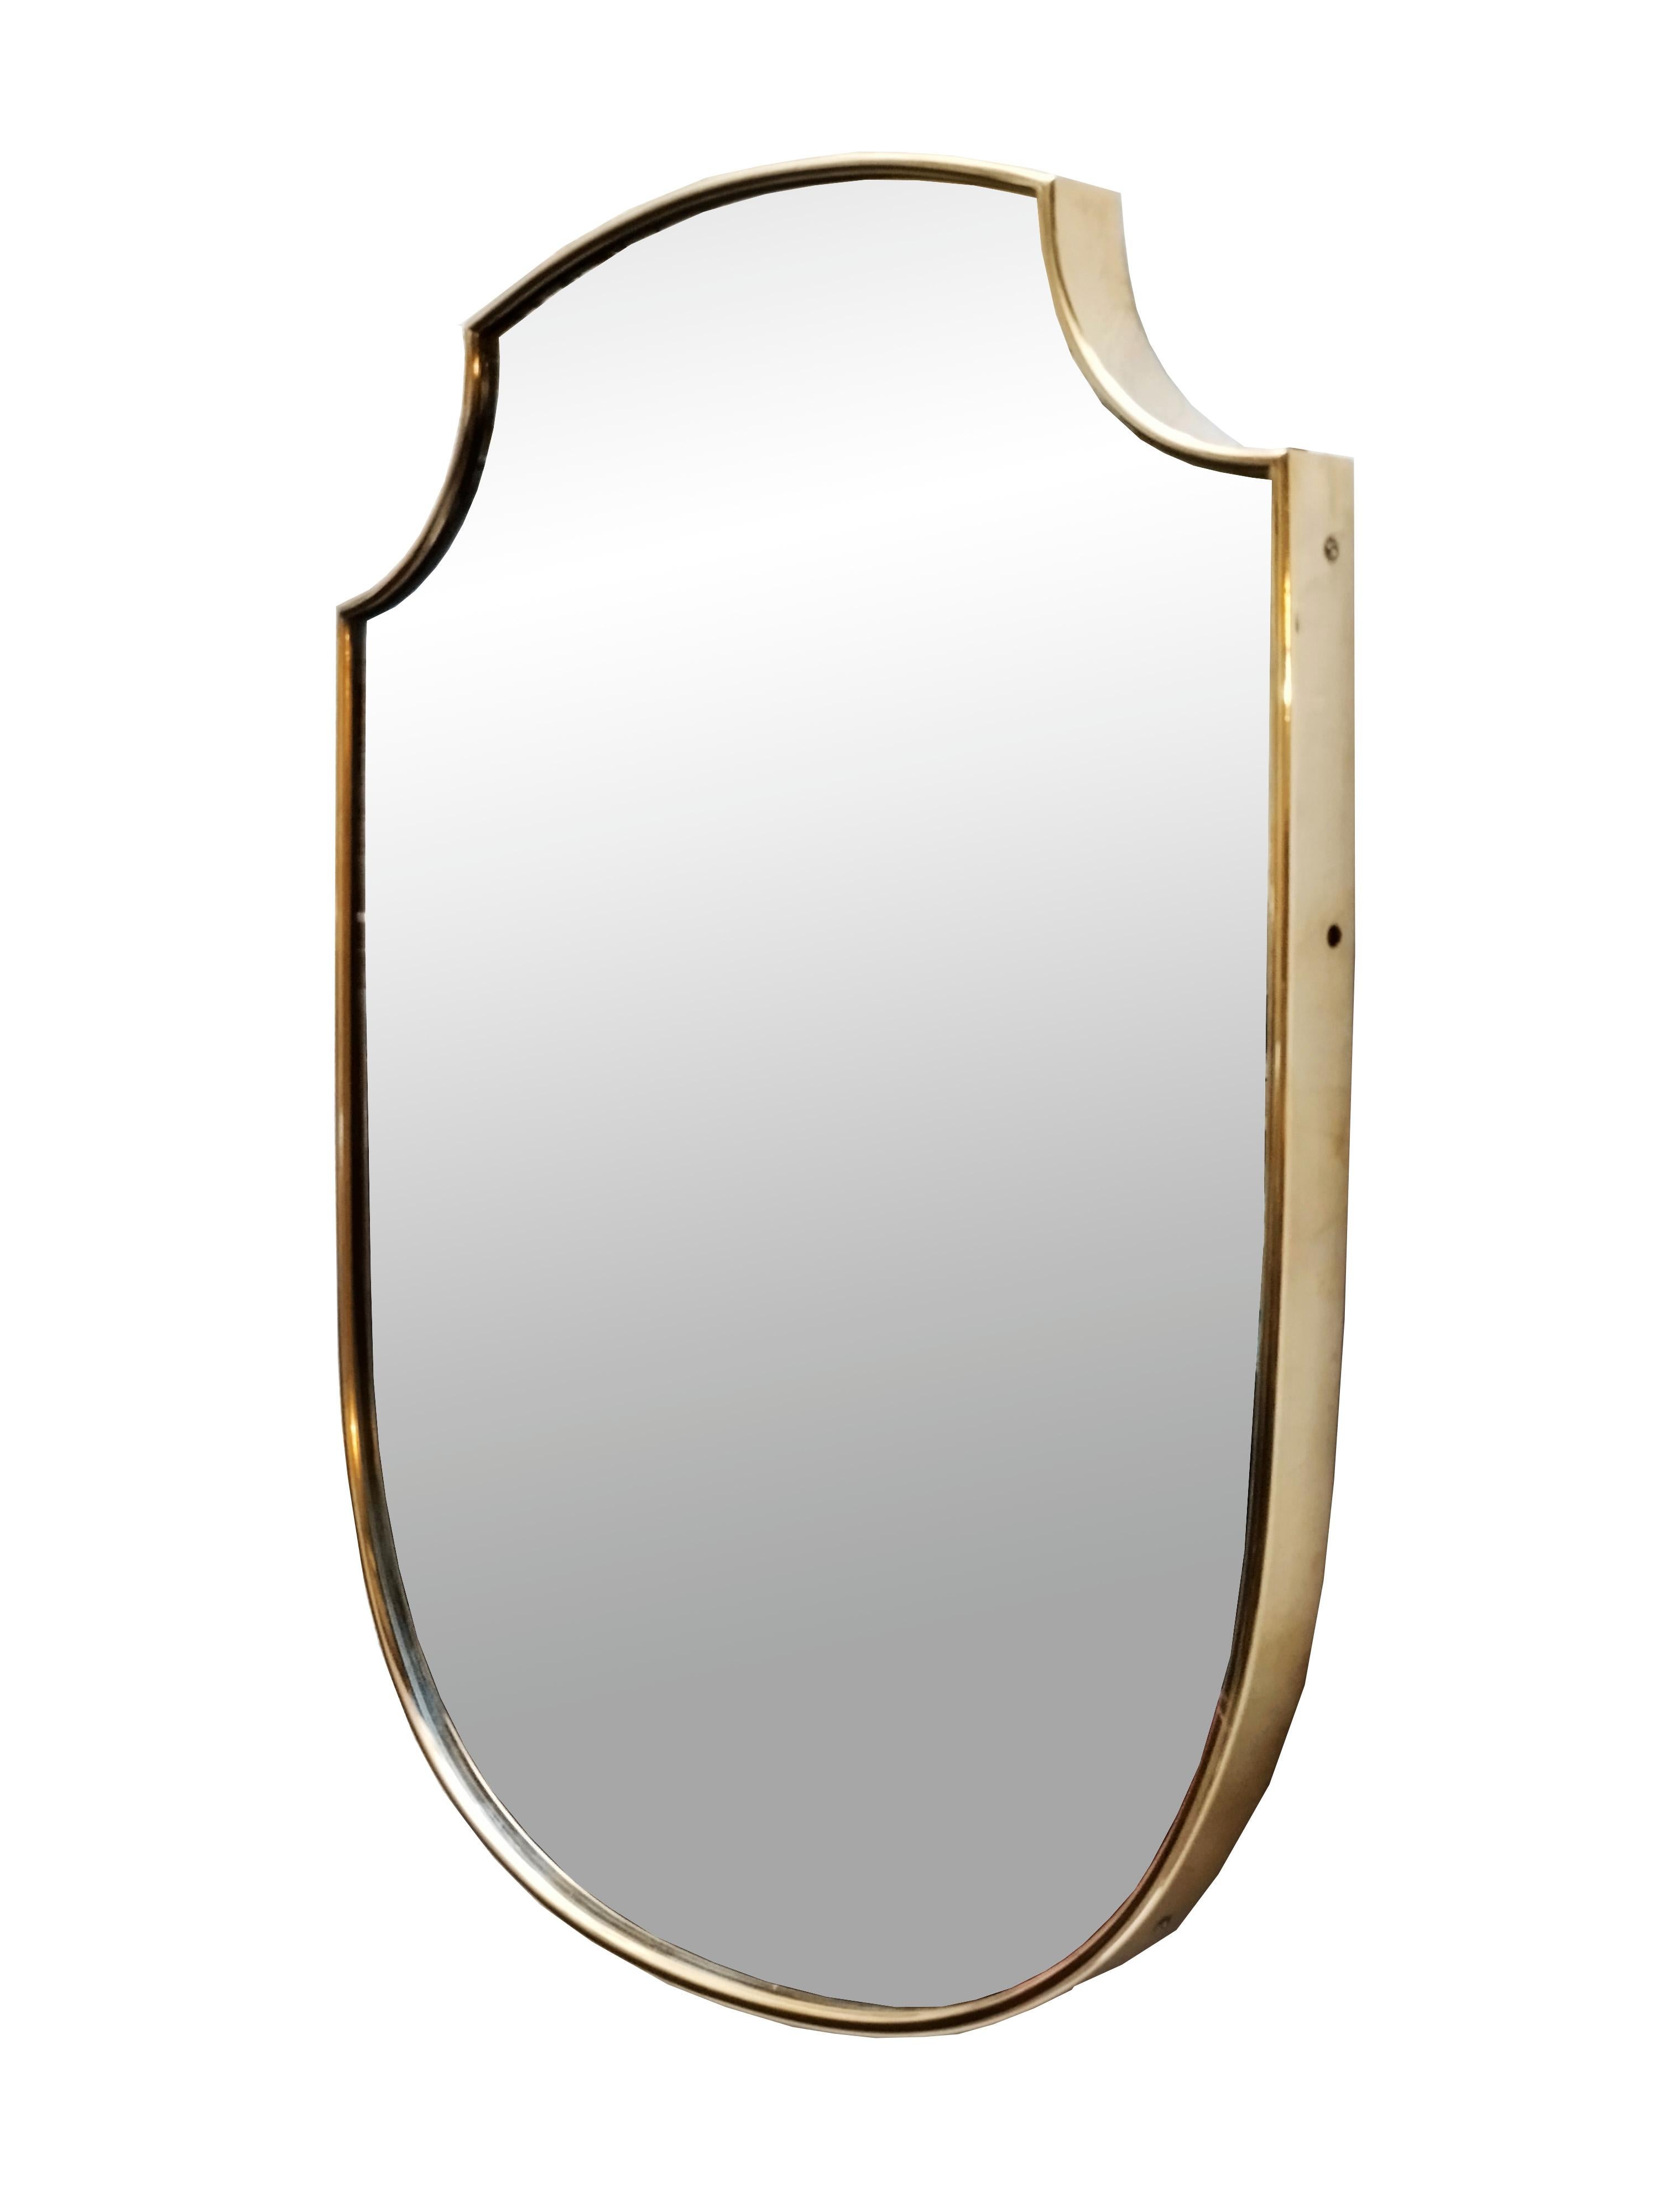 Italian shield wall mirror circa 1950s, solid brass with original patina, mirror has a dullness and beautiful patina due to time. In the manner of Gio' Ponti.
 